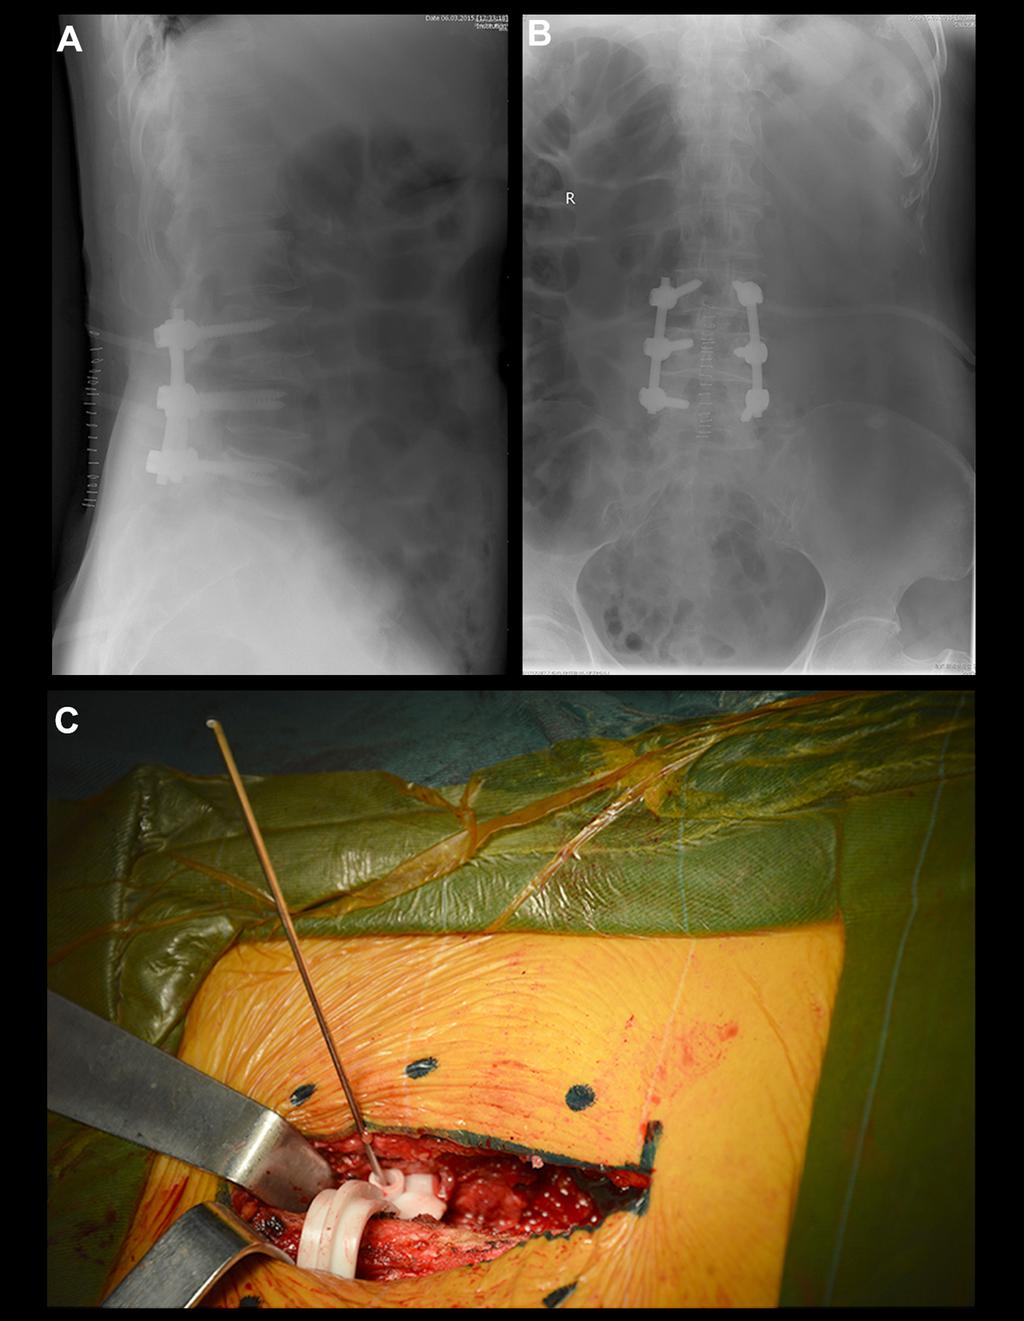 Chen H. et al.: A B C Figure 3. (A) The post-operative lateral x-ray films; (B) The post-operative anterior-posterior x-ray films.